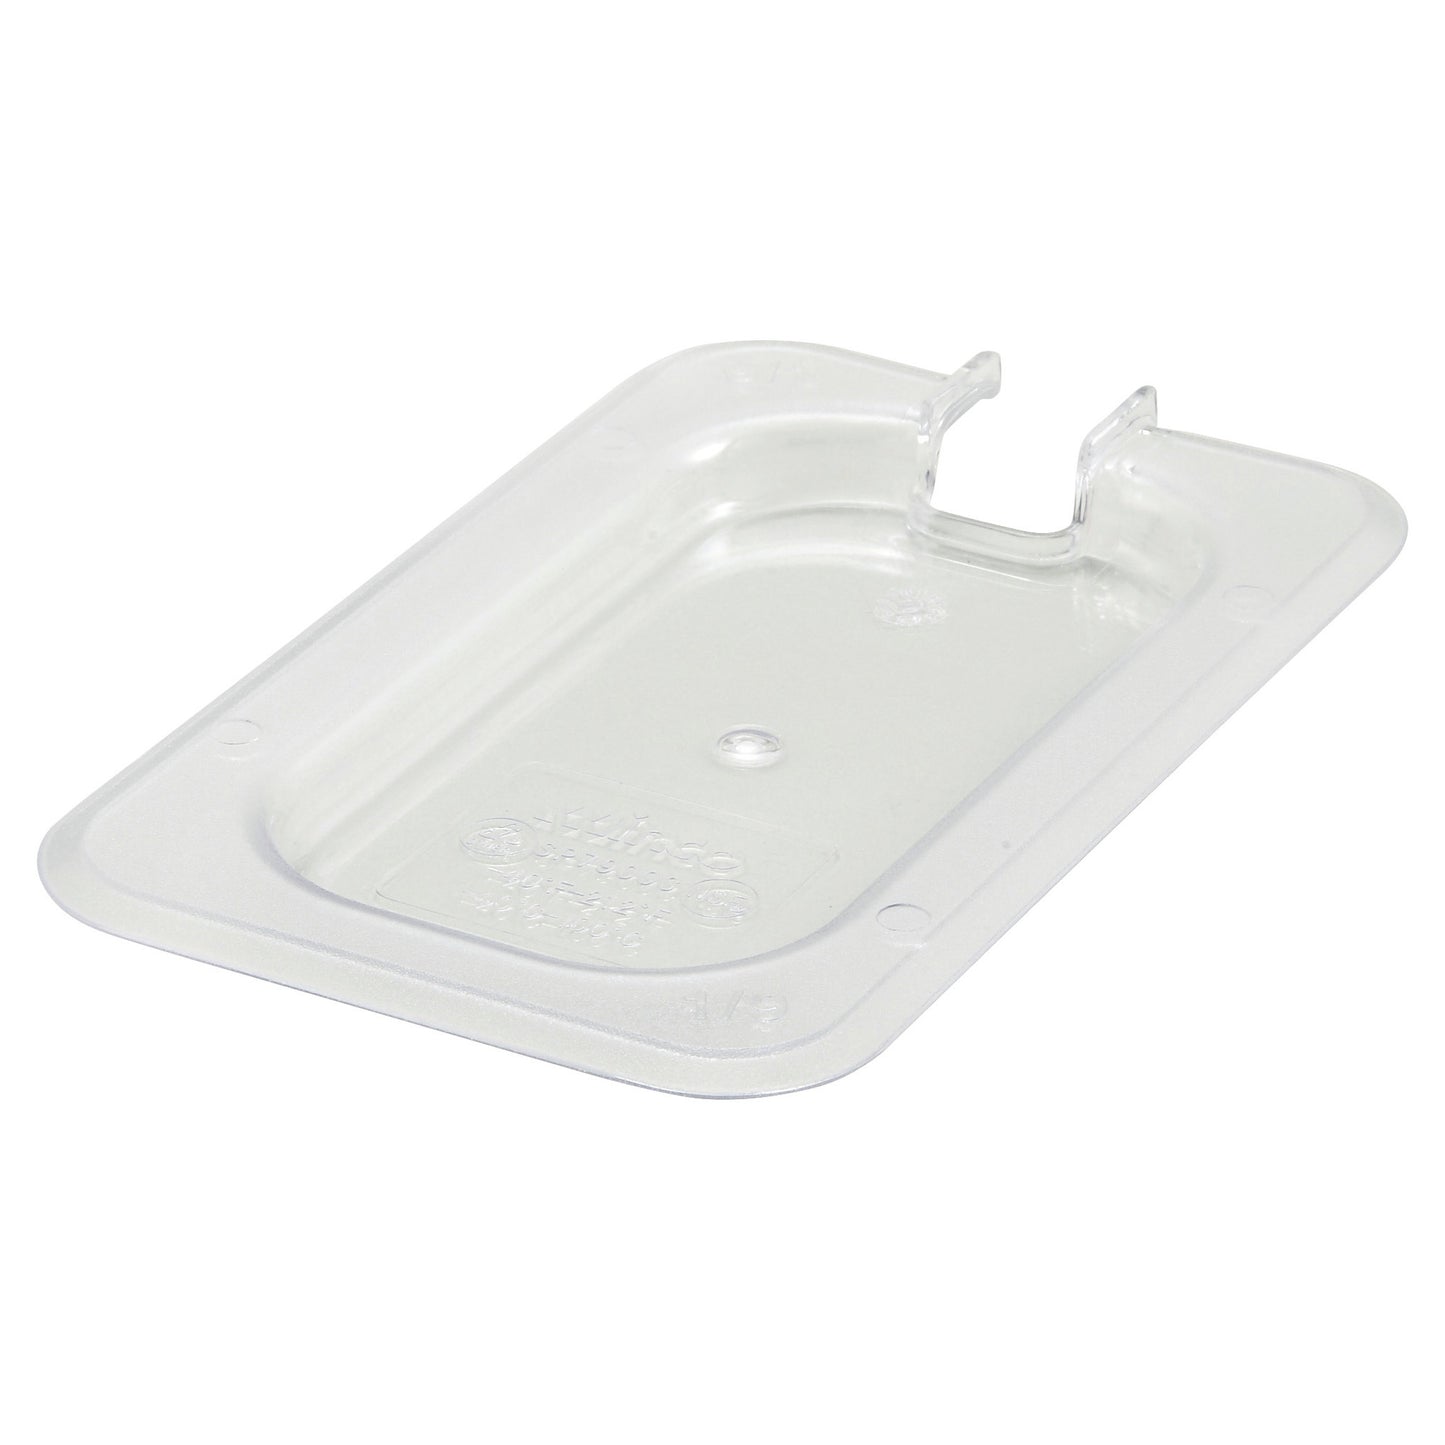 SP7900C - Polycarbonate Food Pan Cover, Slotted - Ninth (1/9)